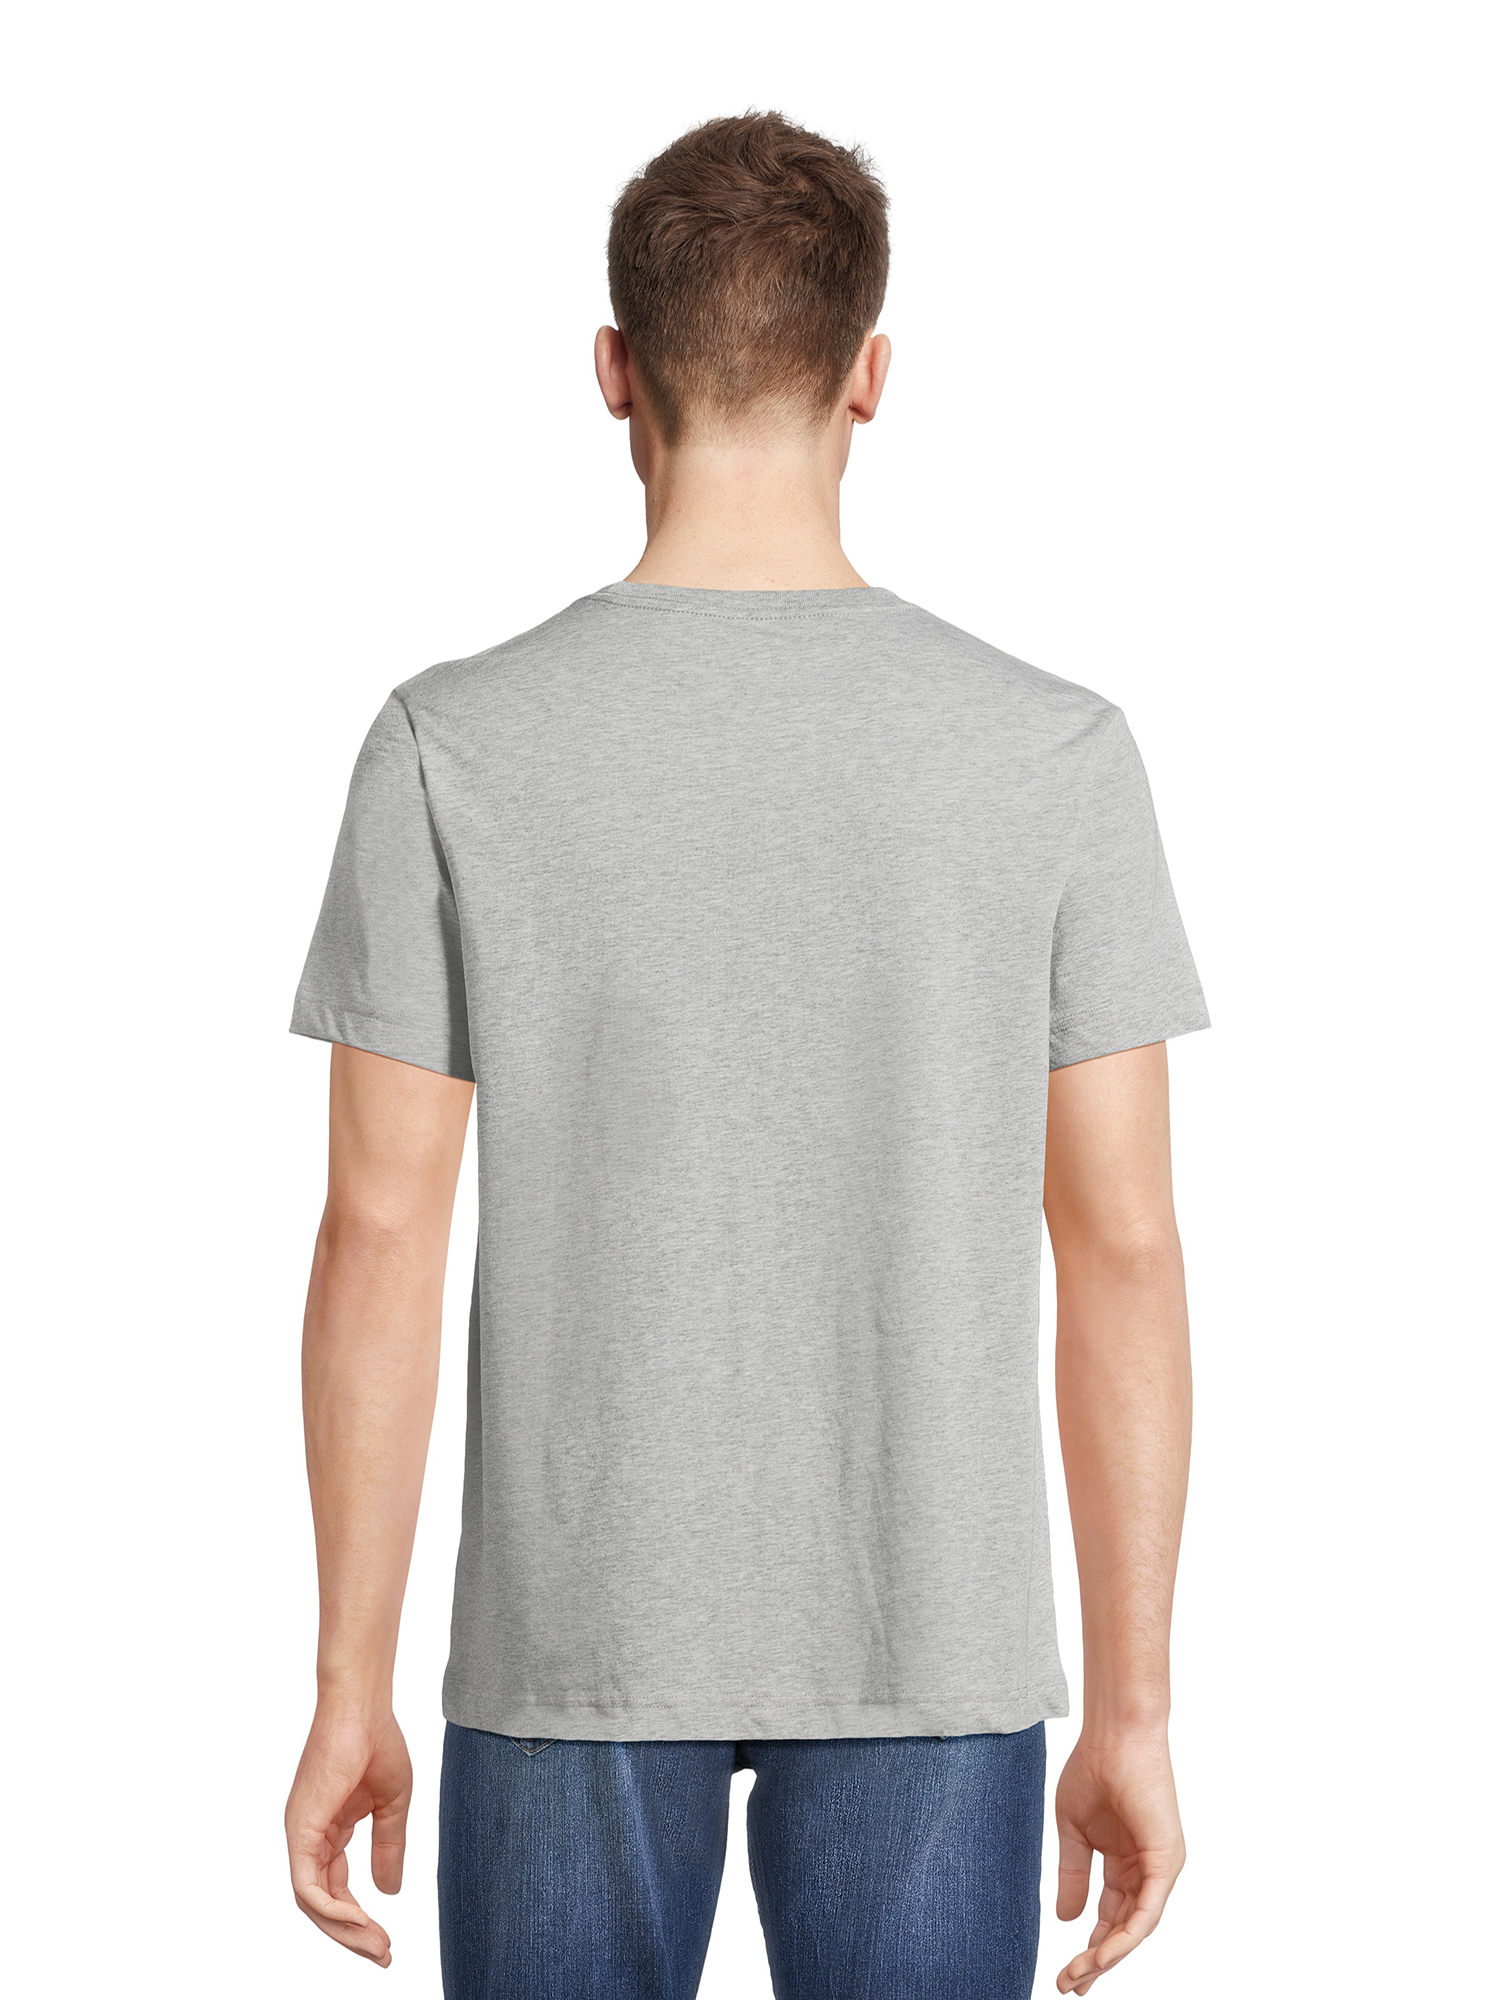 George Men's & Big Men's Crewneck Tee with Short Sleeves, Sizes XS-3XL - image 3 of 5